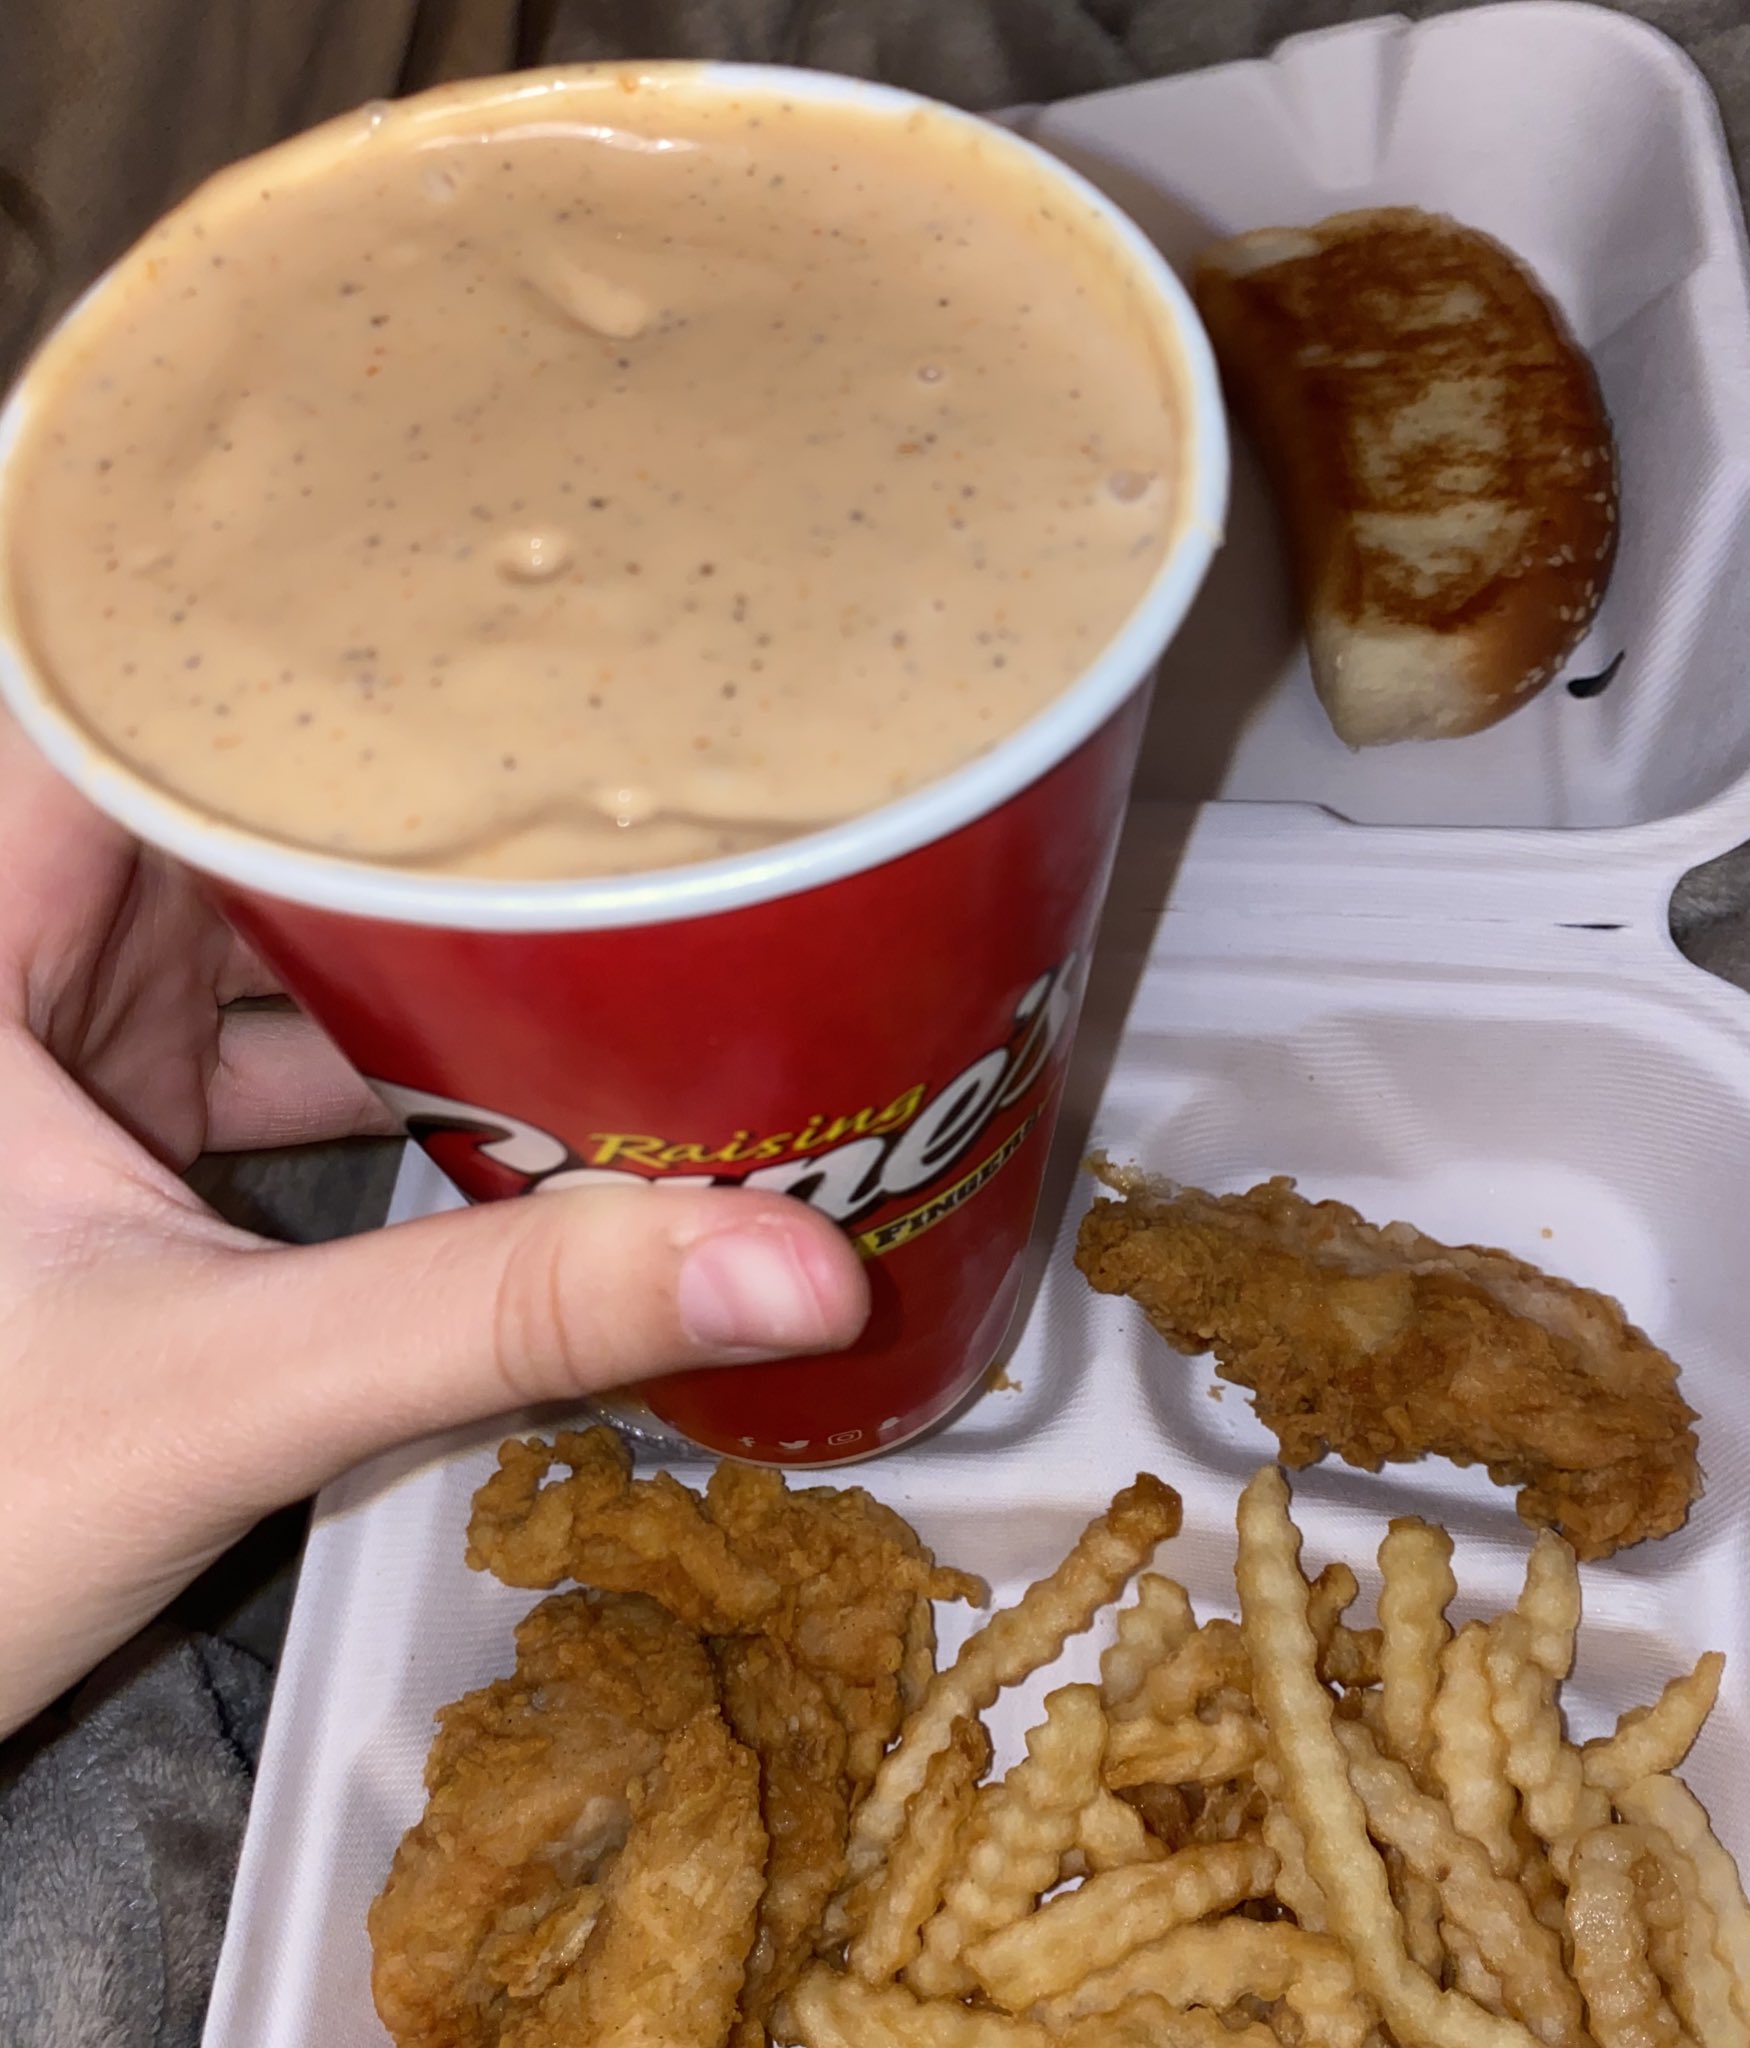 Not food necessarily but I have a large cup of canes sauce. : r